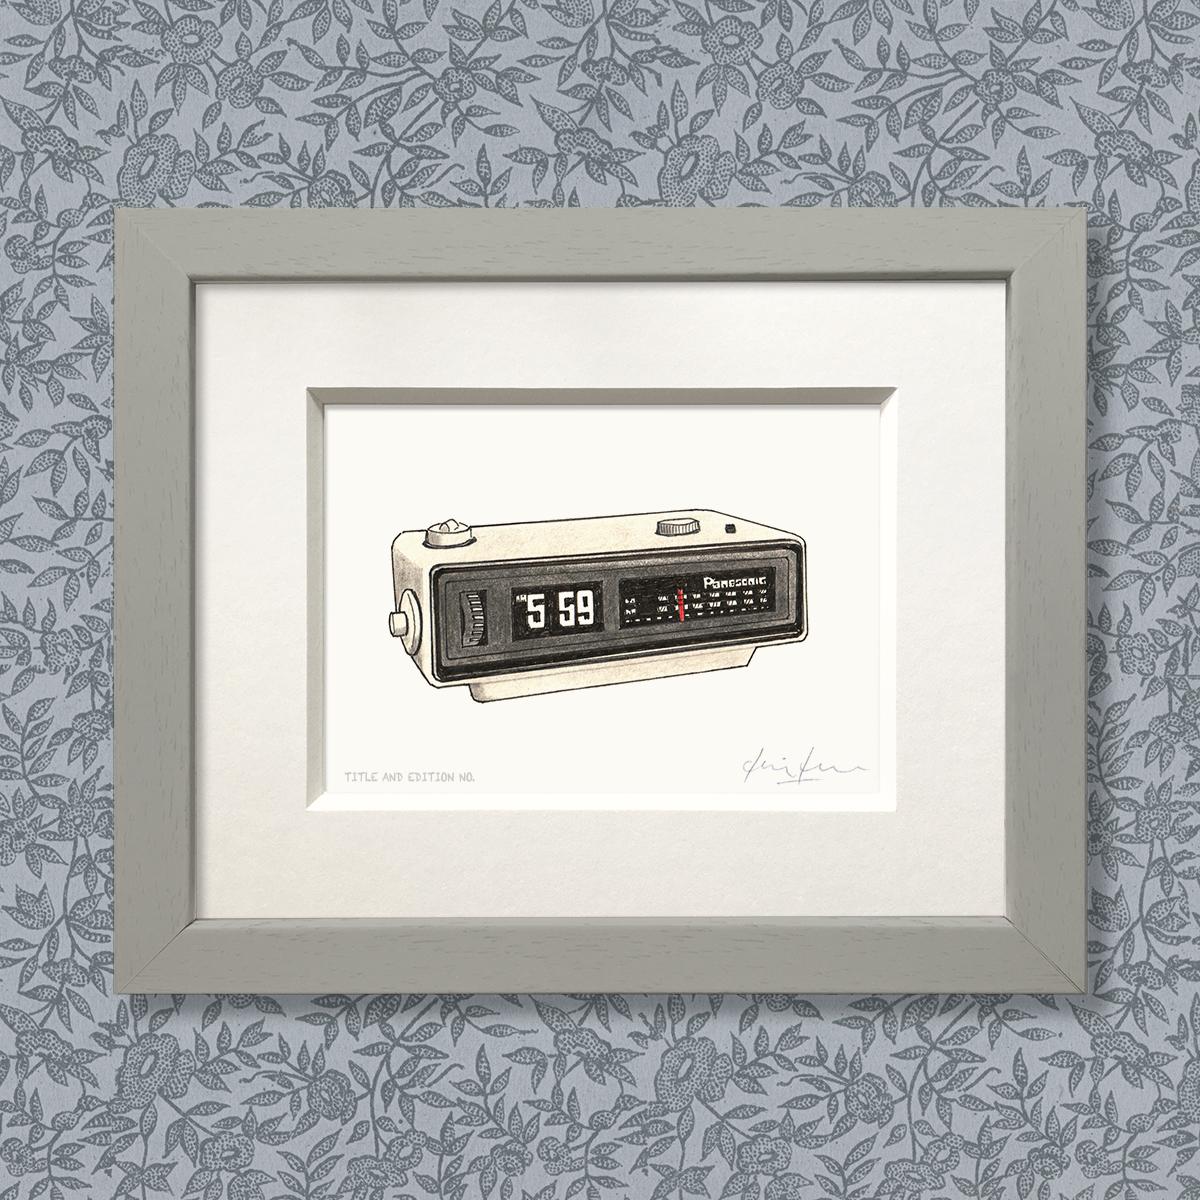 Limited edition print from a pen, ink and coloured pencil drawing of the alarm radio from the film Groundhog Day in a grey frame